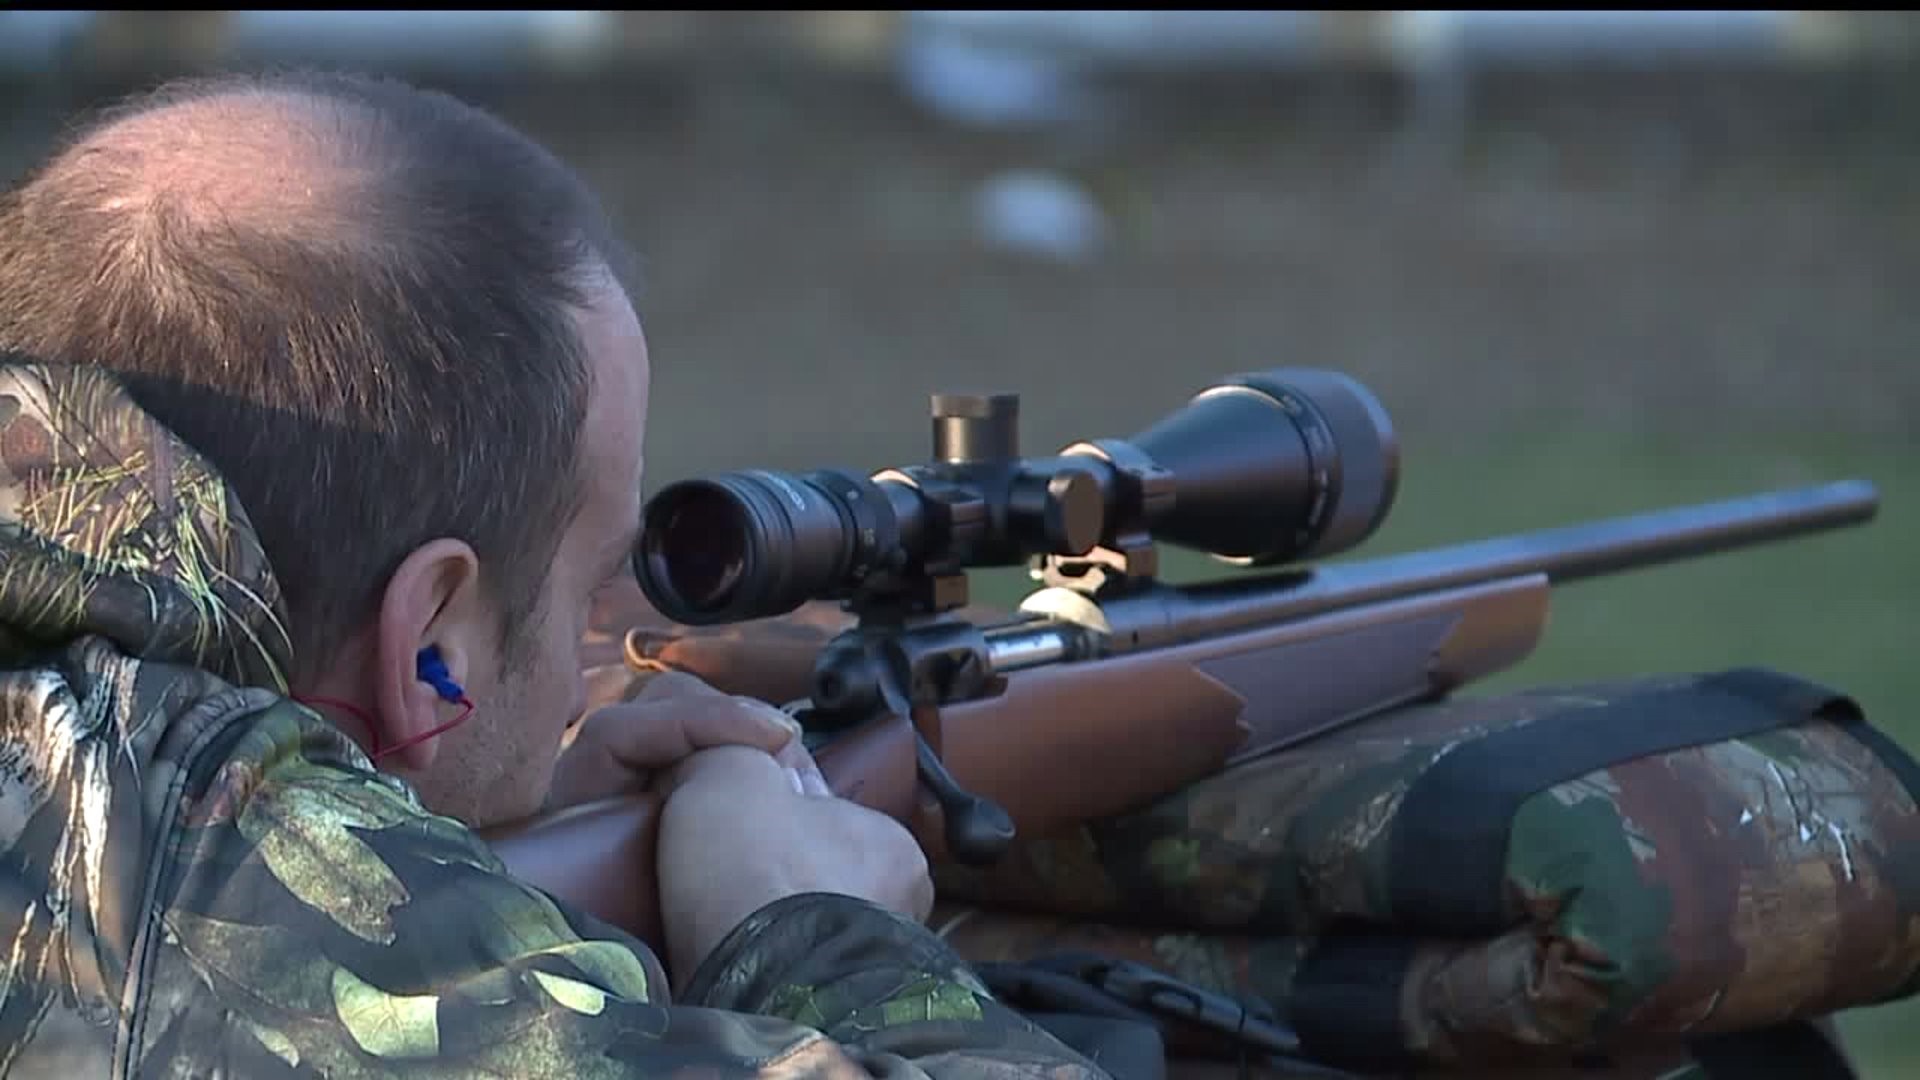 Hunters gear up for the start of deer rifle season